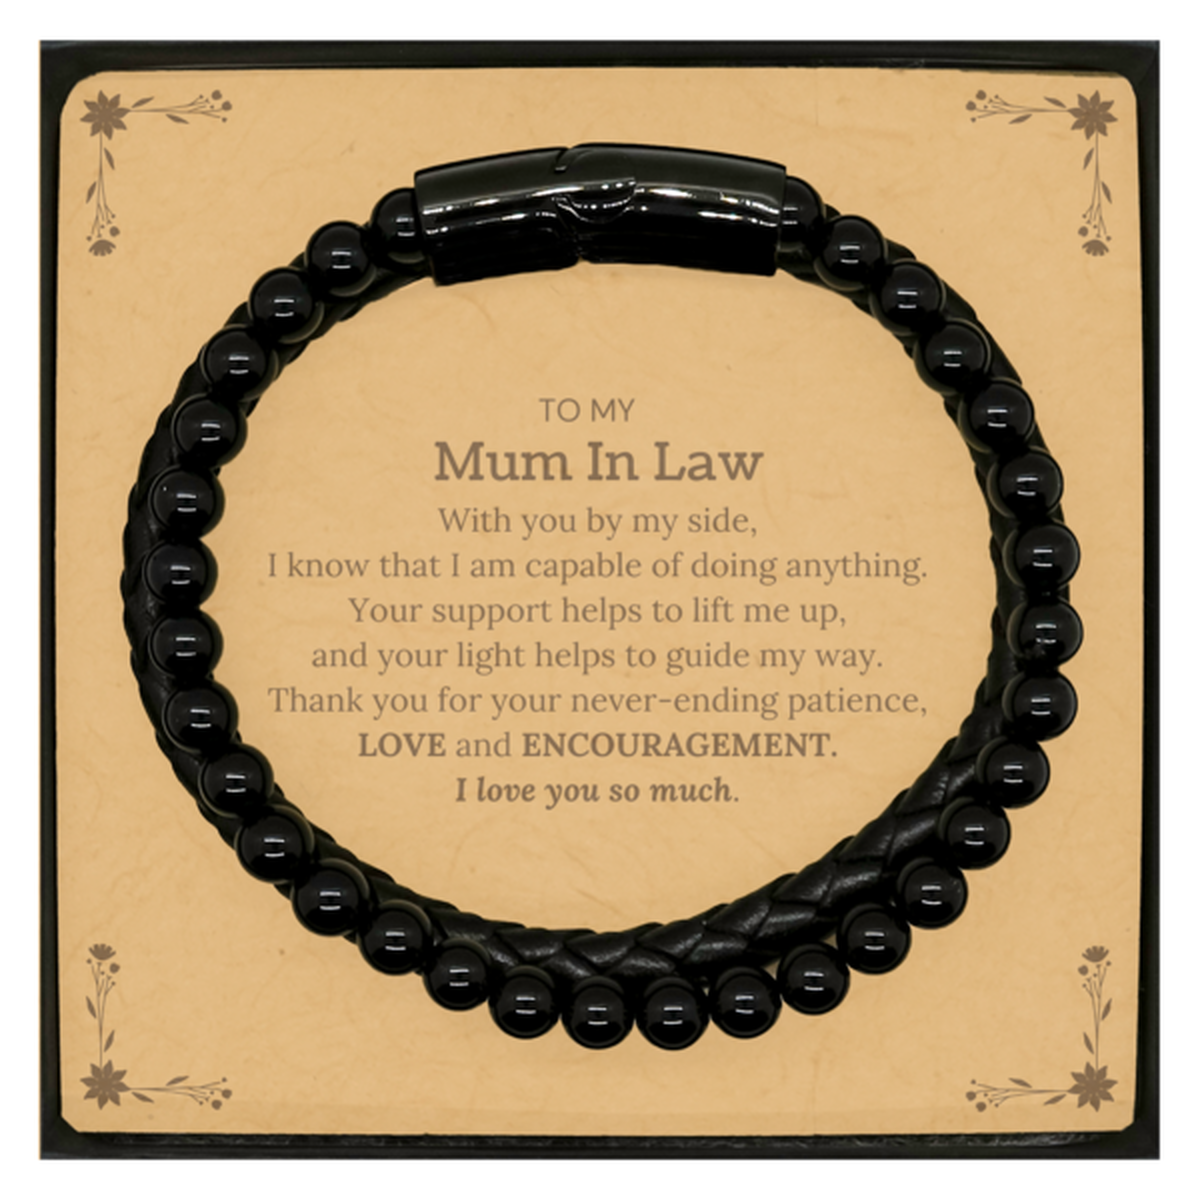 Appreciation Mum In Law  Stone Leather Bracelets Gifts, To My Mum In Law  Birthday Christmas Wedding Keepsake Gifts for Mum In Law  With you by my side, I know that I am capable of doing anything. I love you so much